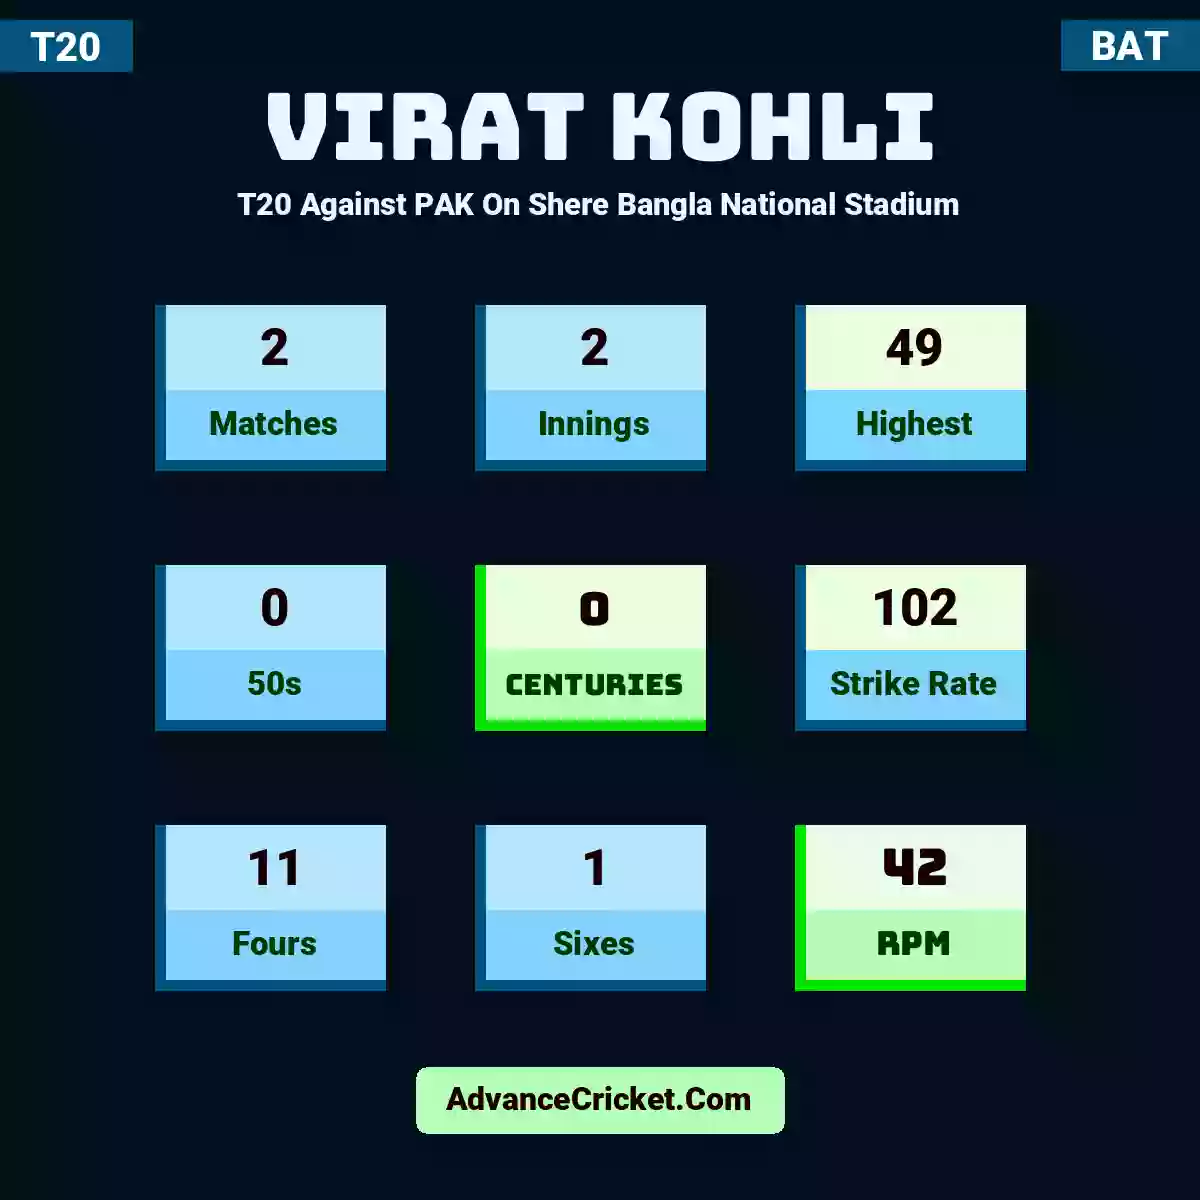 Virat Kohli T20  Against PAK On Shere Bangla National Stadium, Virat Kohli played 2 matches, scored 49 runs as highest, 0 half-centuries, and 0 centuries, with a strike rate of 102. V.Kohli hit 11 fours and 1 sixes, with an RPM of 42.